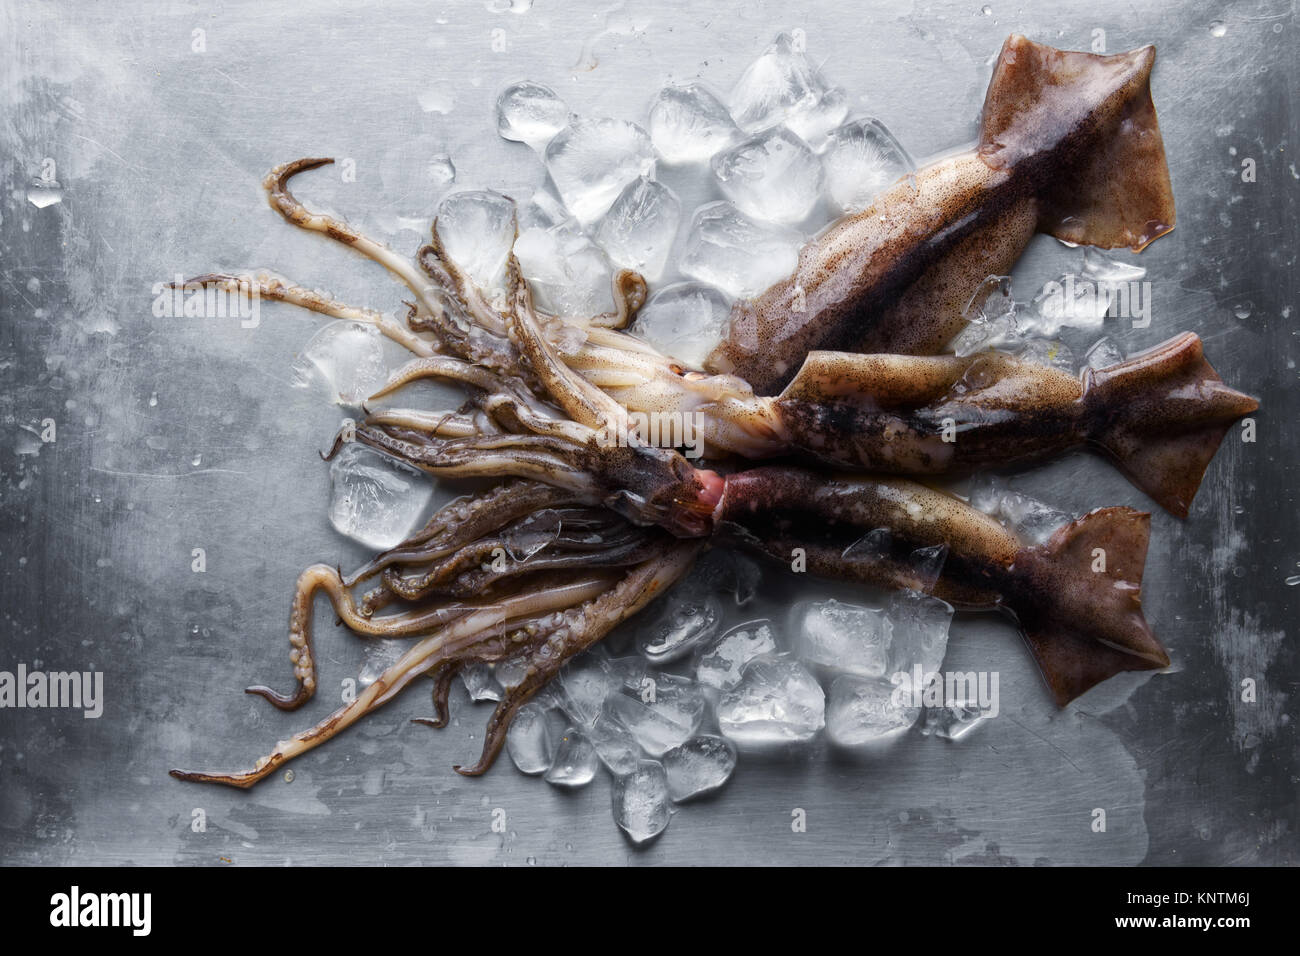 Raw squid with ice cubes on steel plate Stock Photo